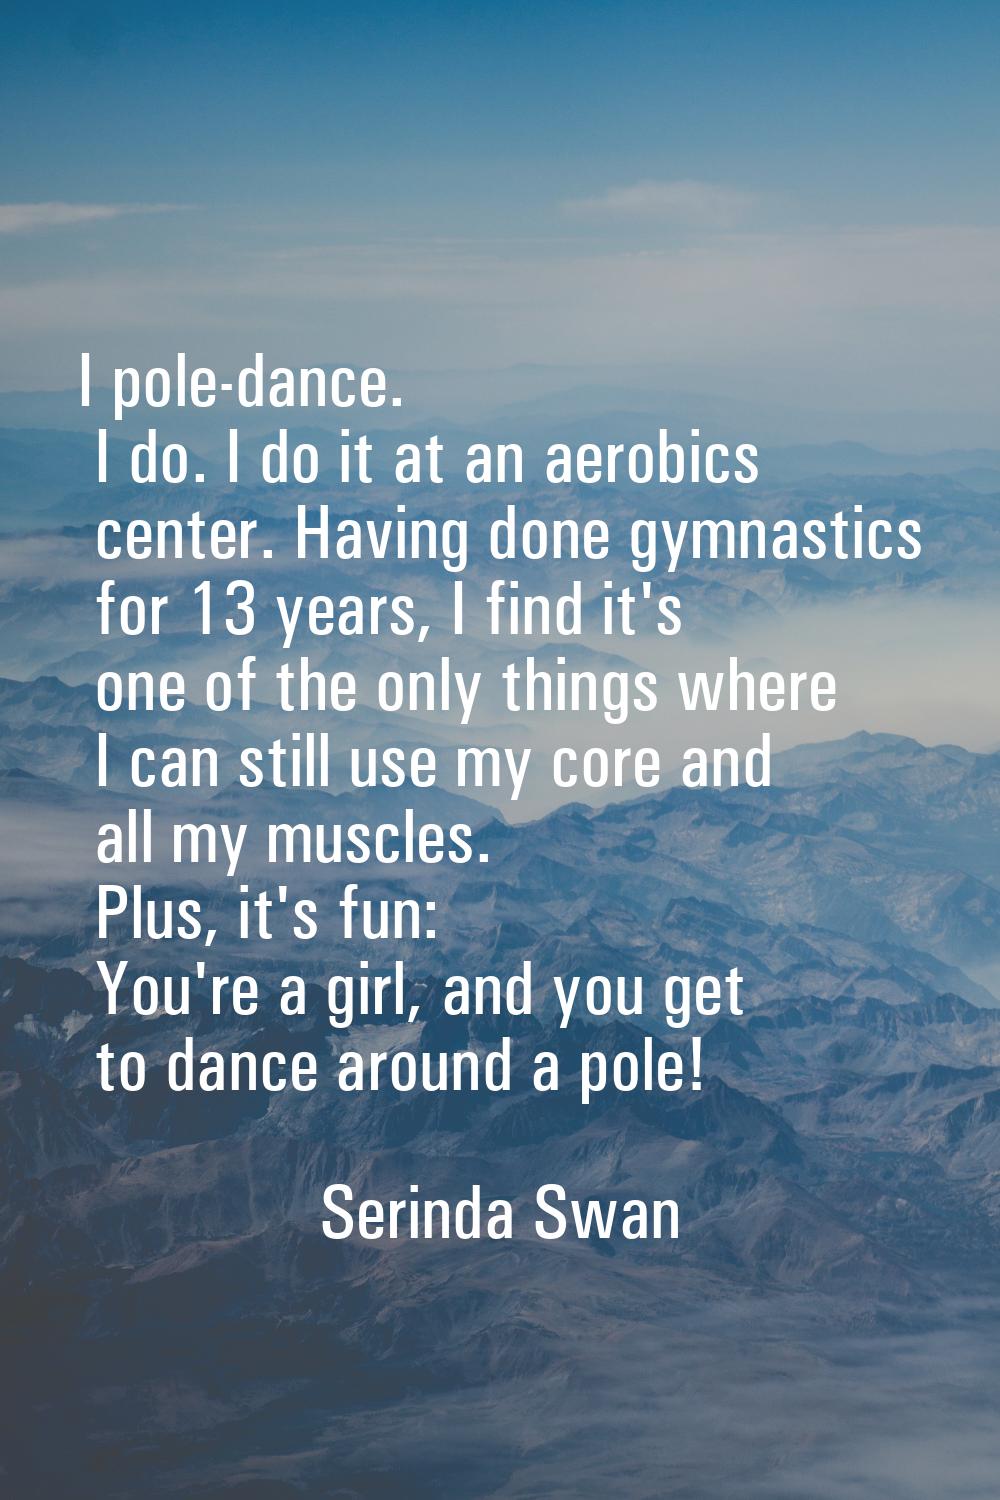 I pole-dance. I do. I do it at an aerobics center. Having done gymnastics for 13 years, I find it's